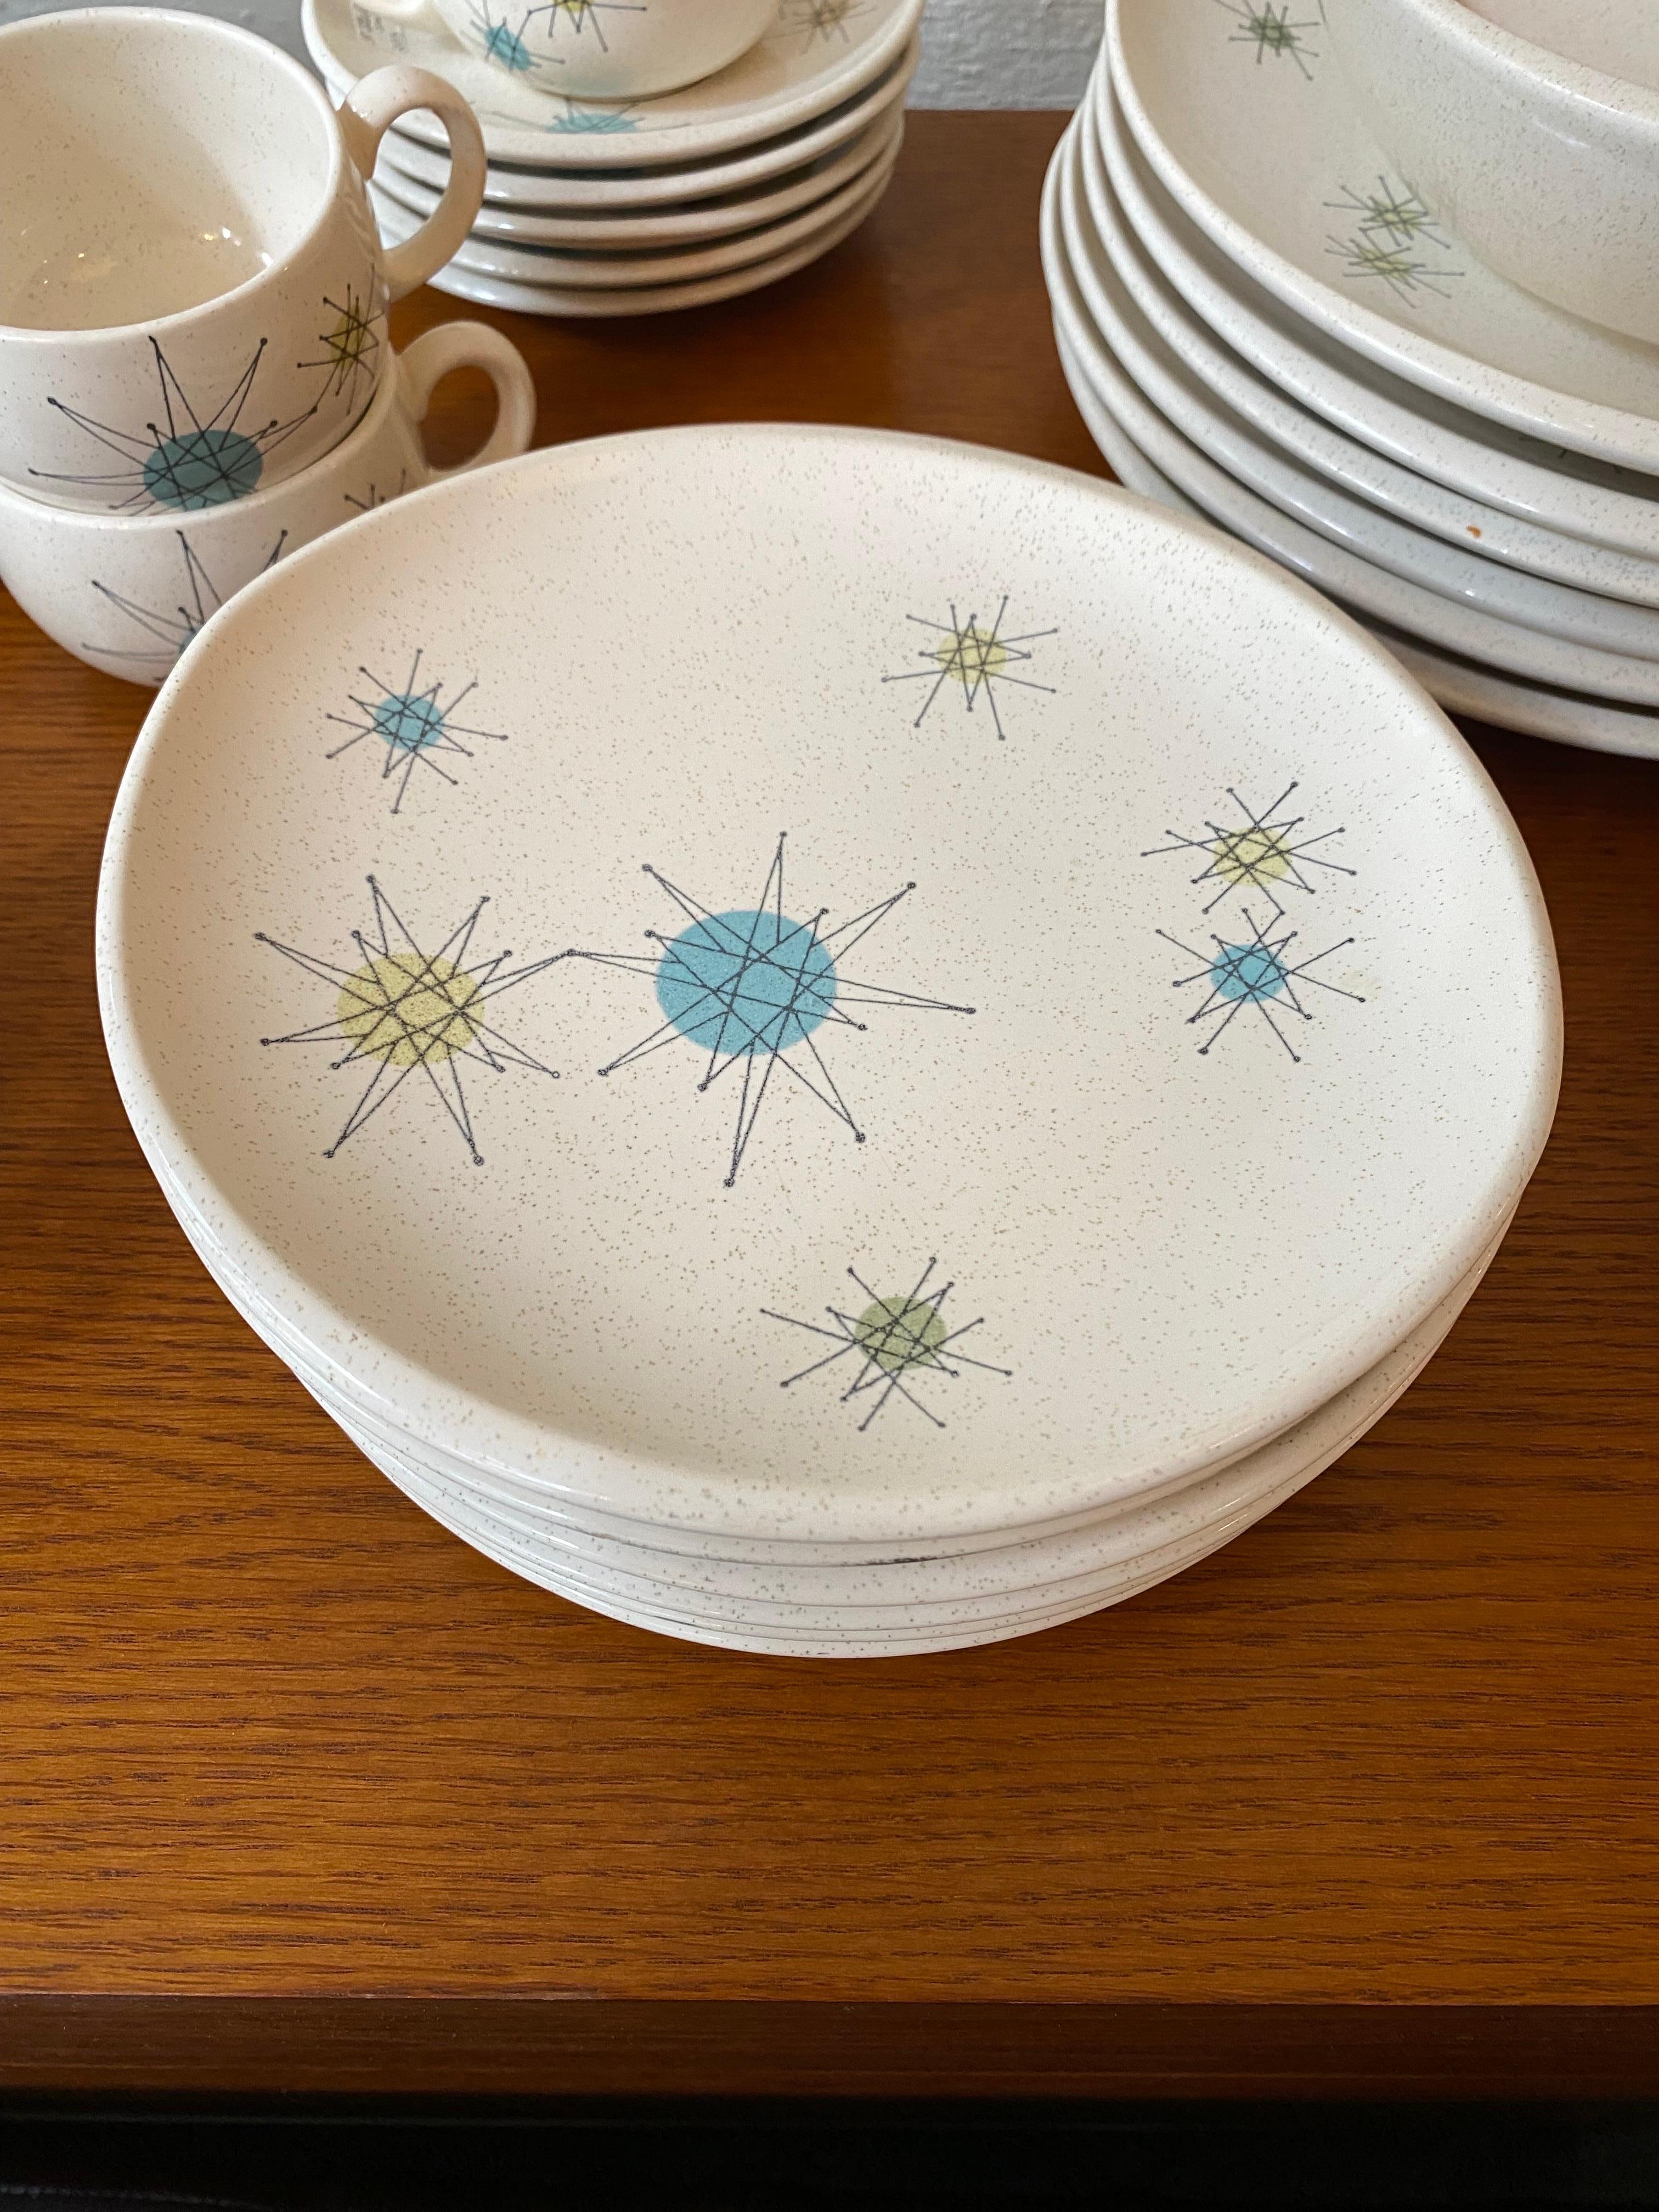 Set of Franciscan Dinnerware in the Starburst Pattern.
Set includes!
6 11